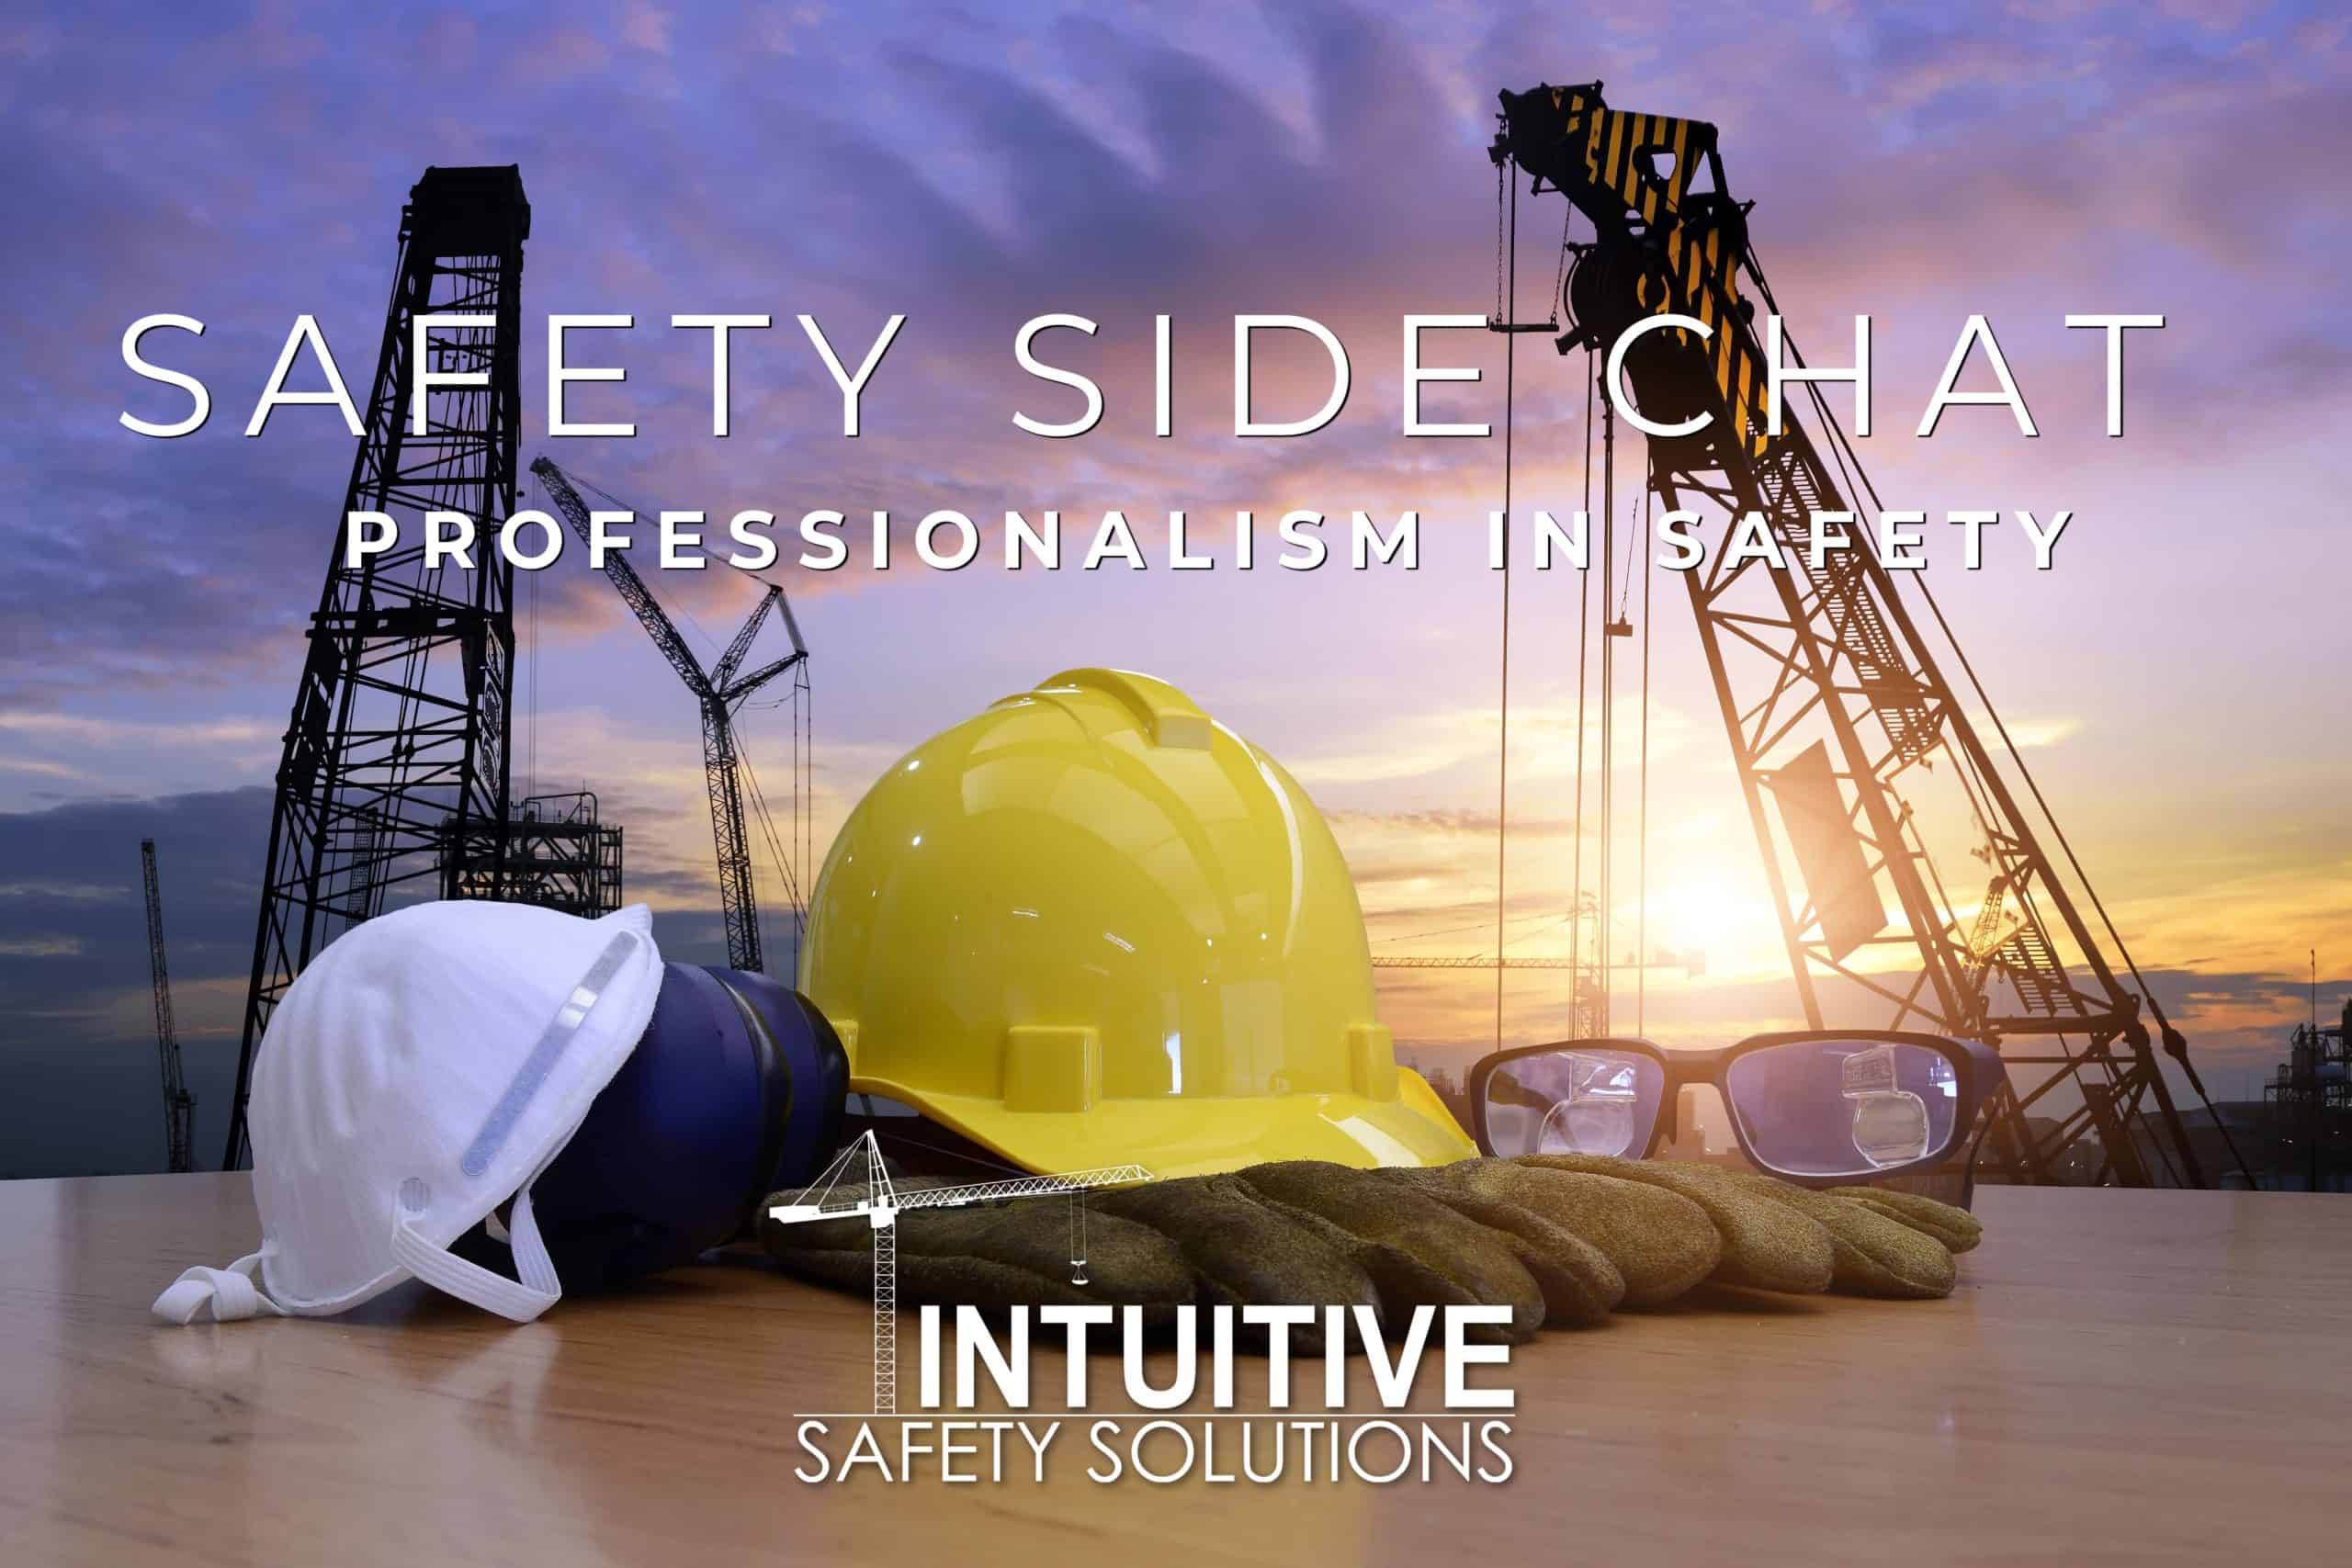 You are currently viewing Safety Side Chat – Professionalism in Safety